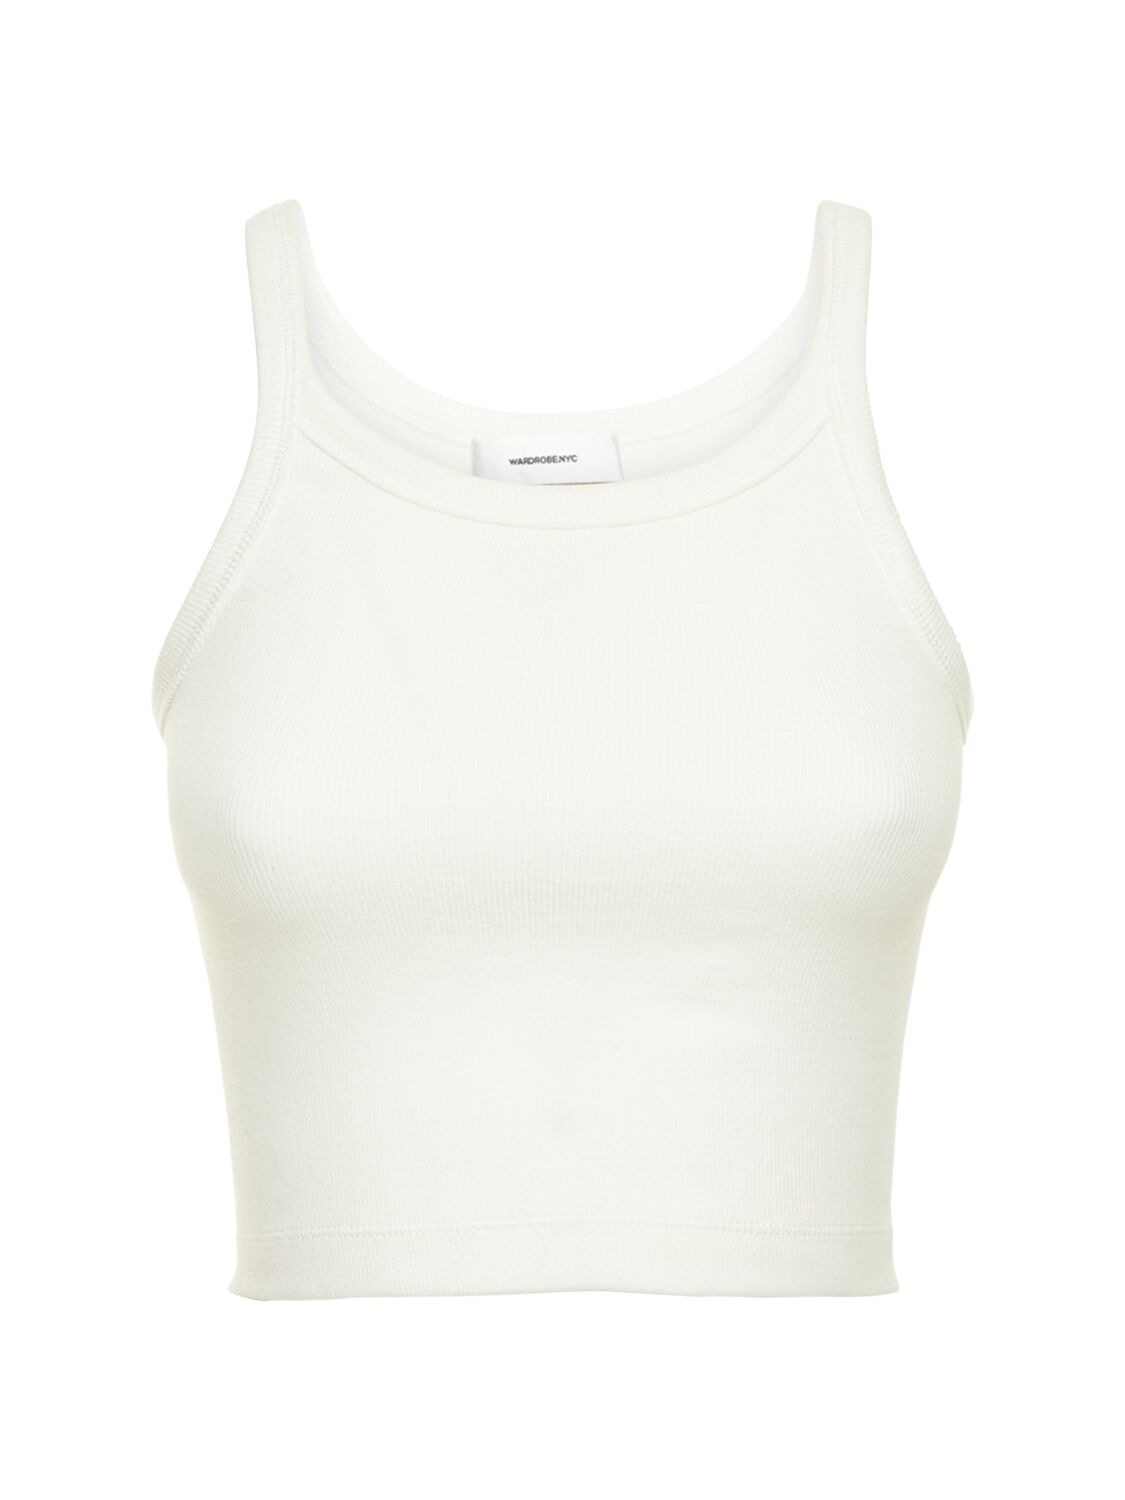 Image of Hb Ribbed Stretch Cotton Tank Top